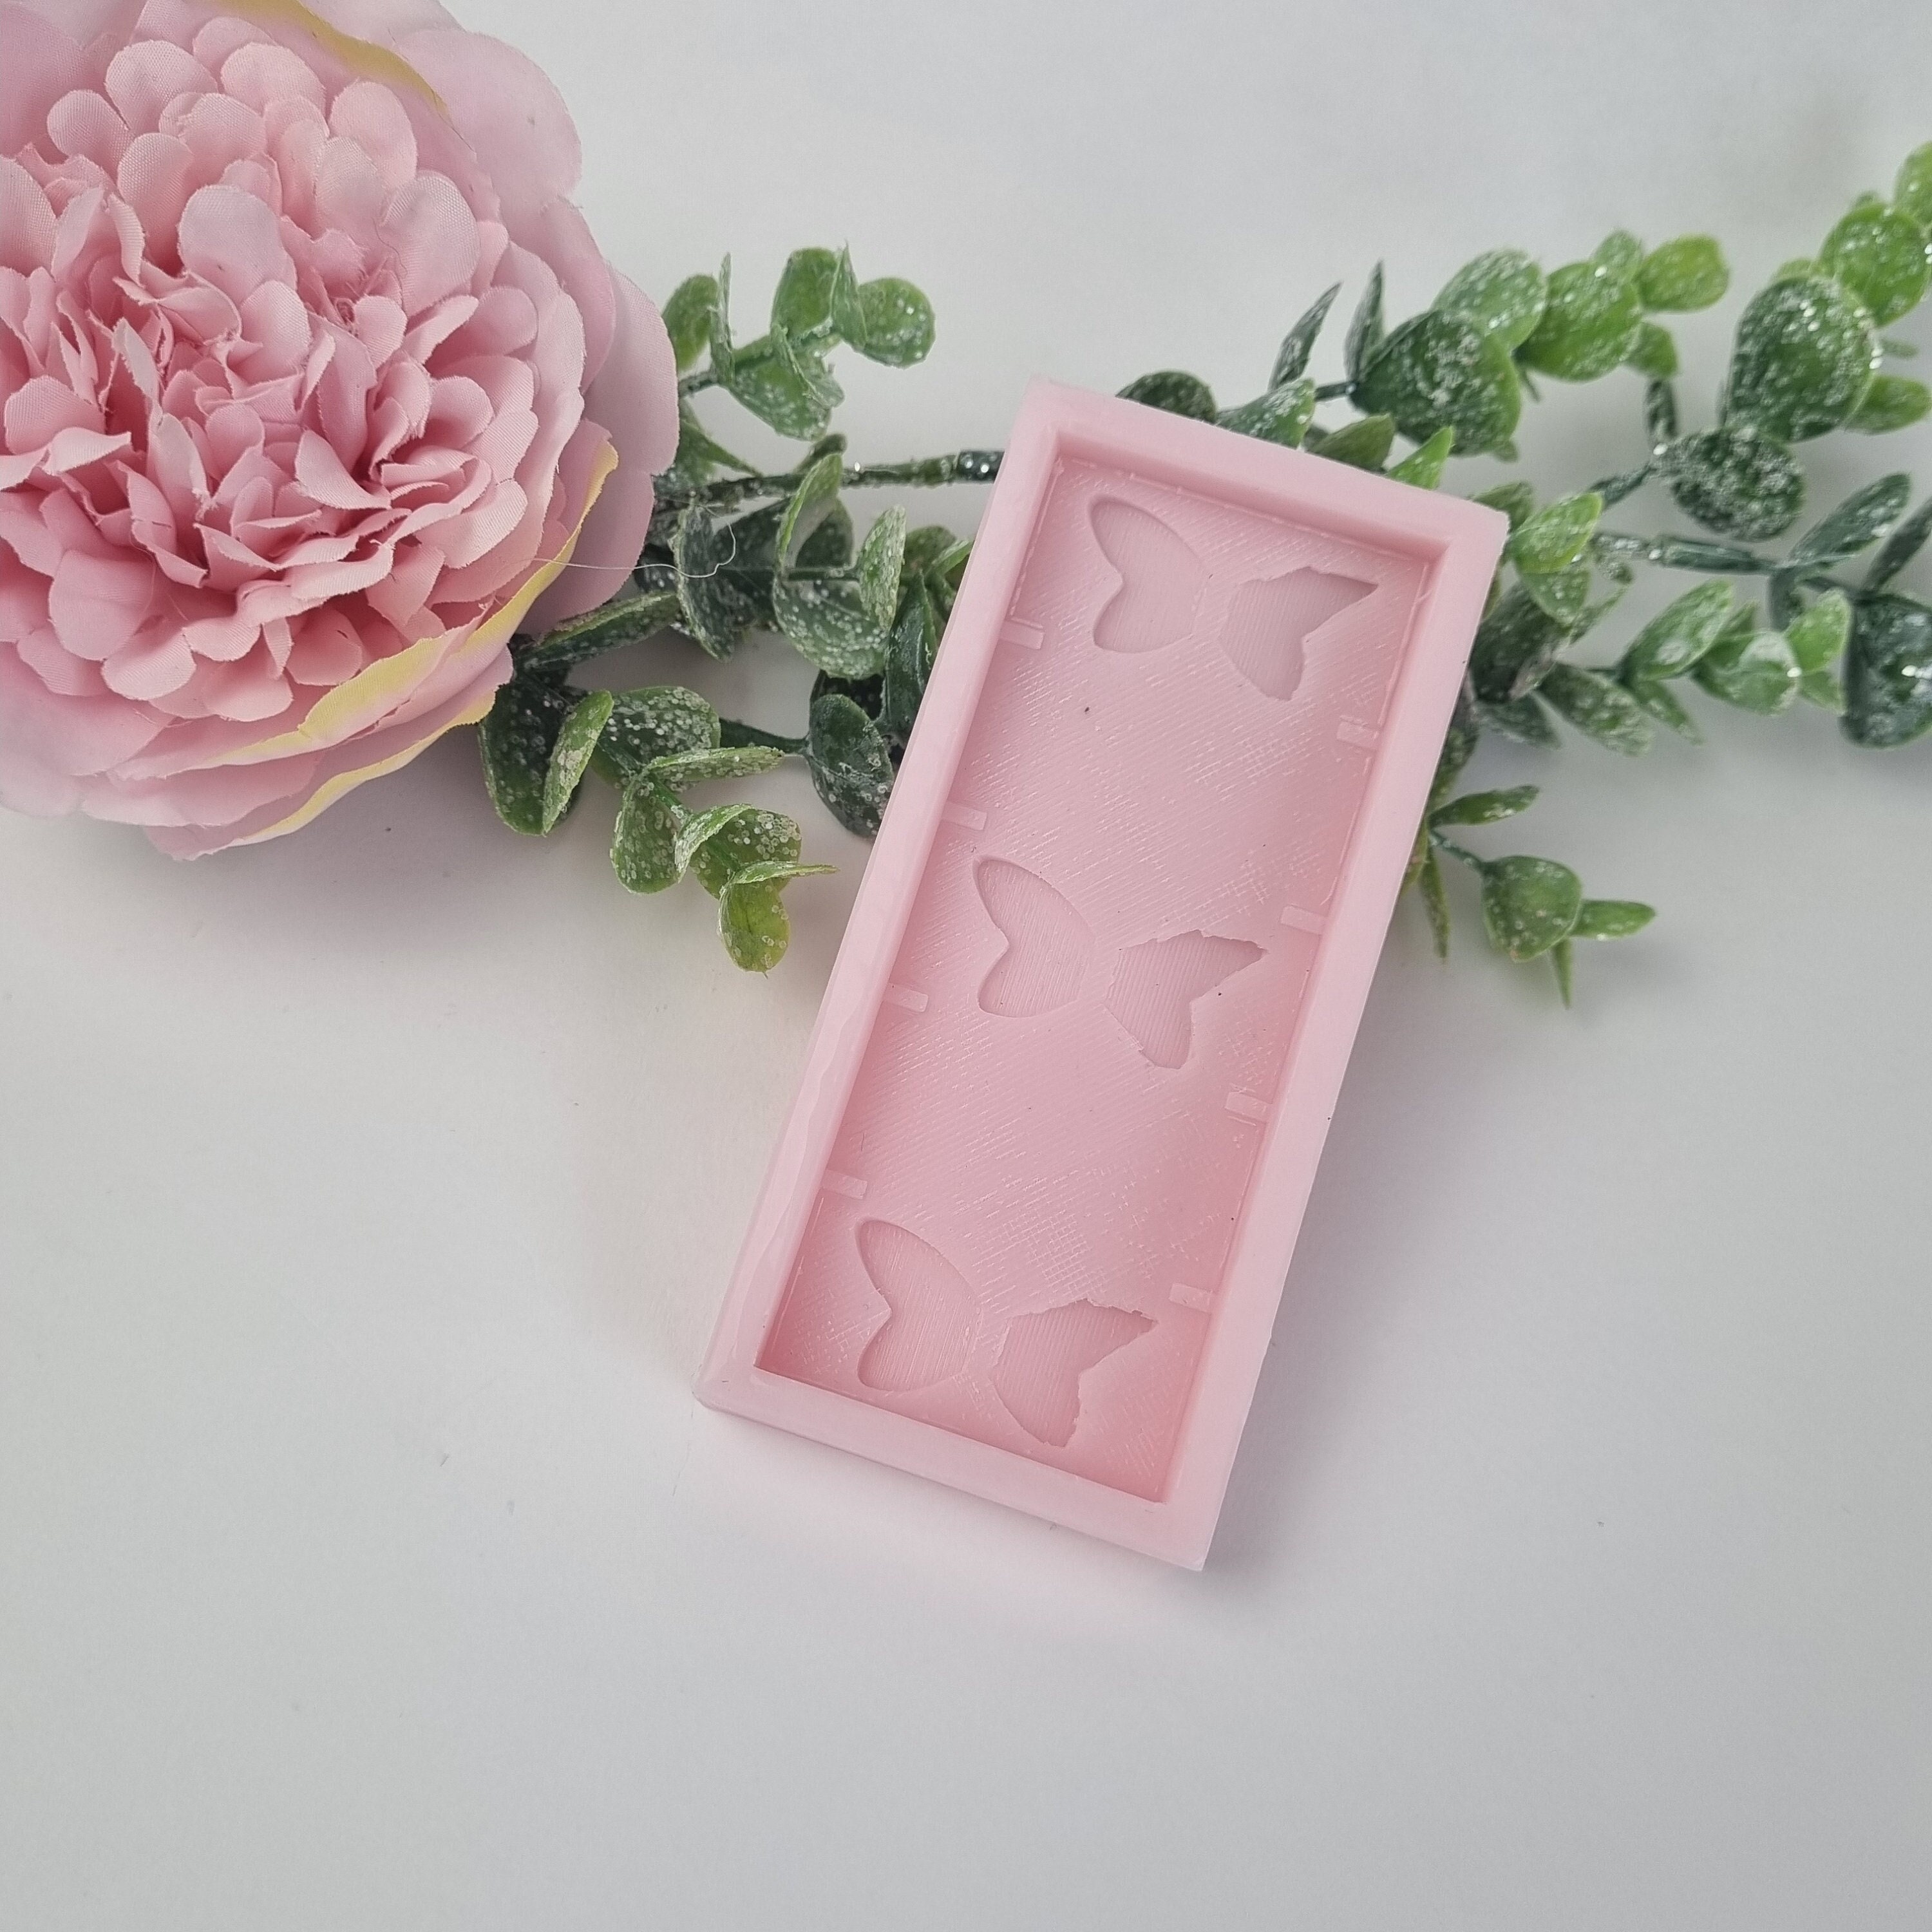 Large Butterfly Beetle Flower Shape Molds Ice Cube Tray PUDSIRN Non-Stick Cake Chocolate Baking Molds Soap Molds 3PCS Insects Silicone Molds 